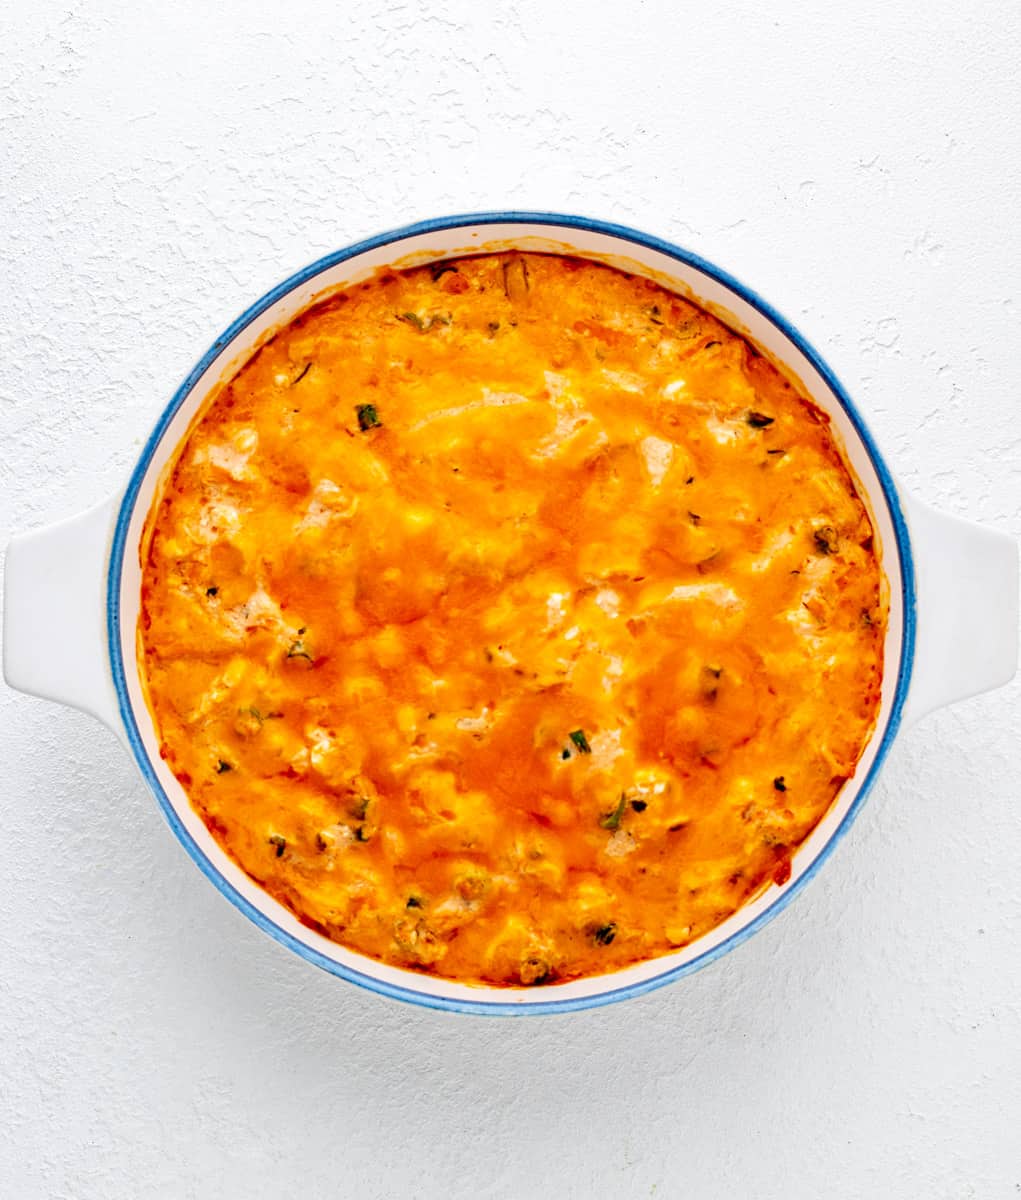 Buffalo chicken dip fresh out of the oven.